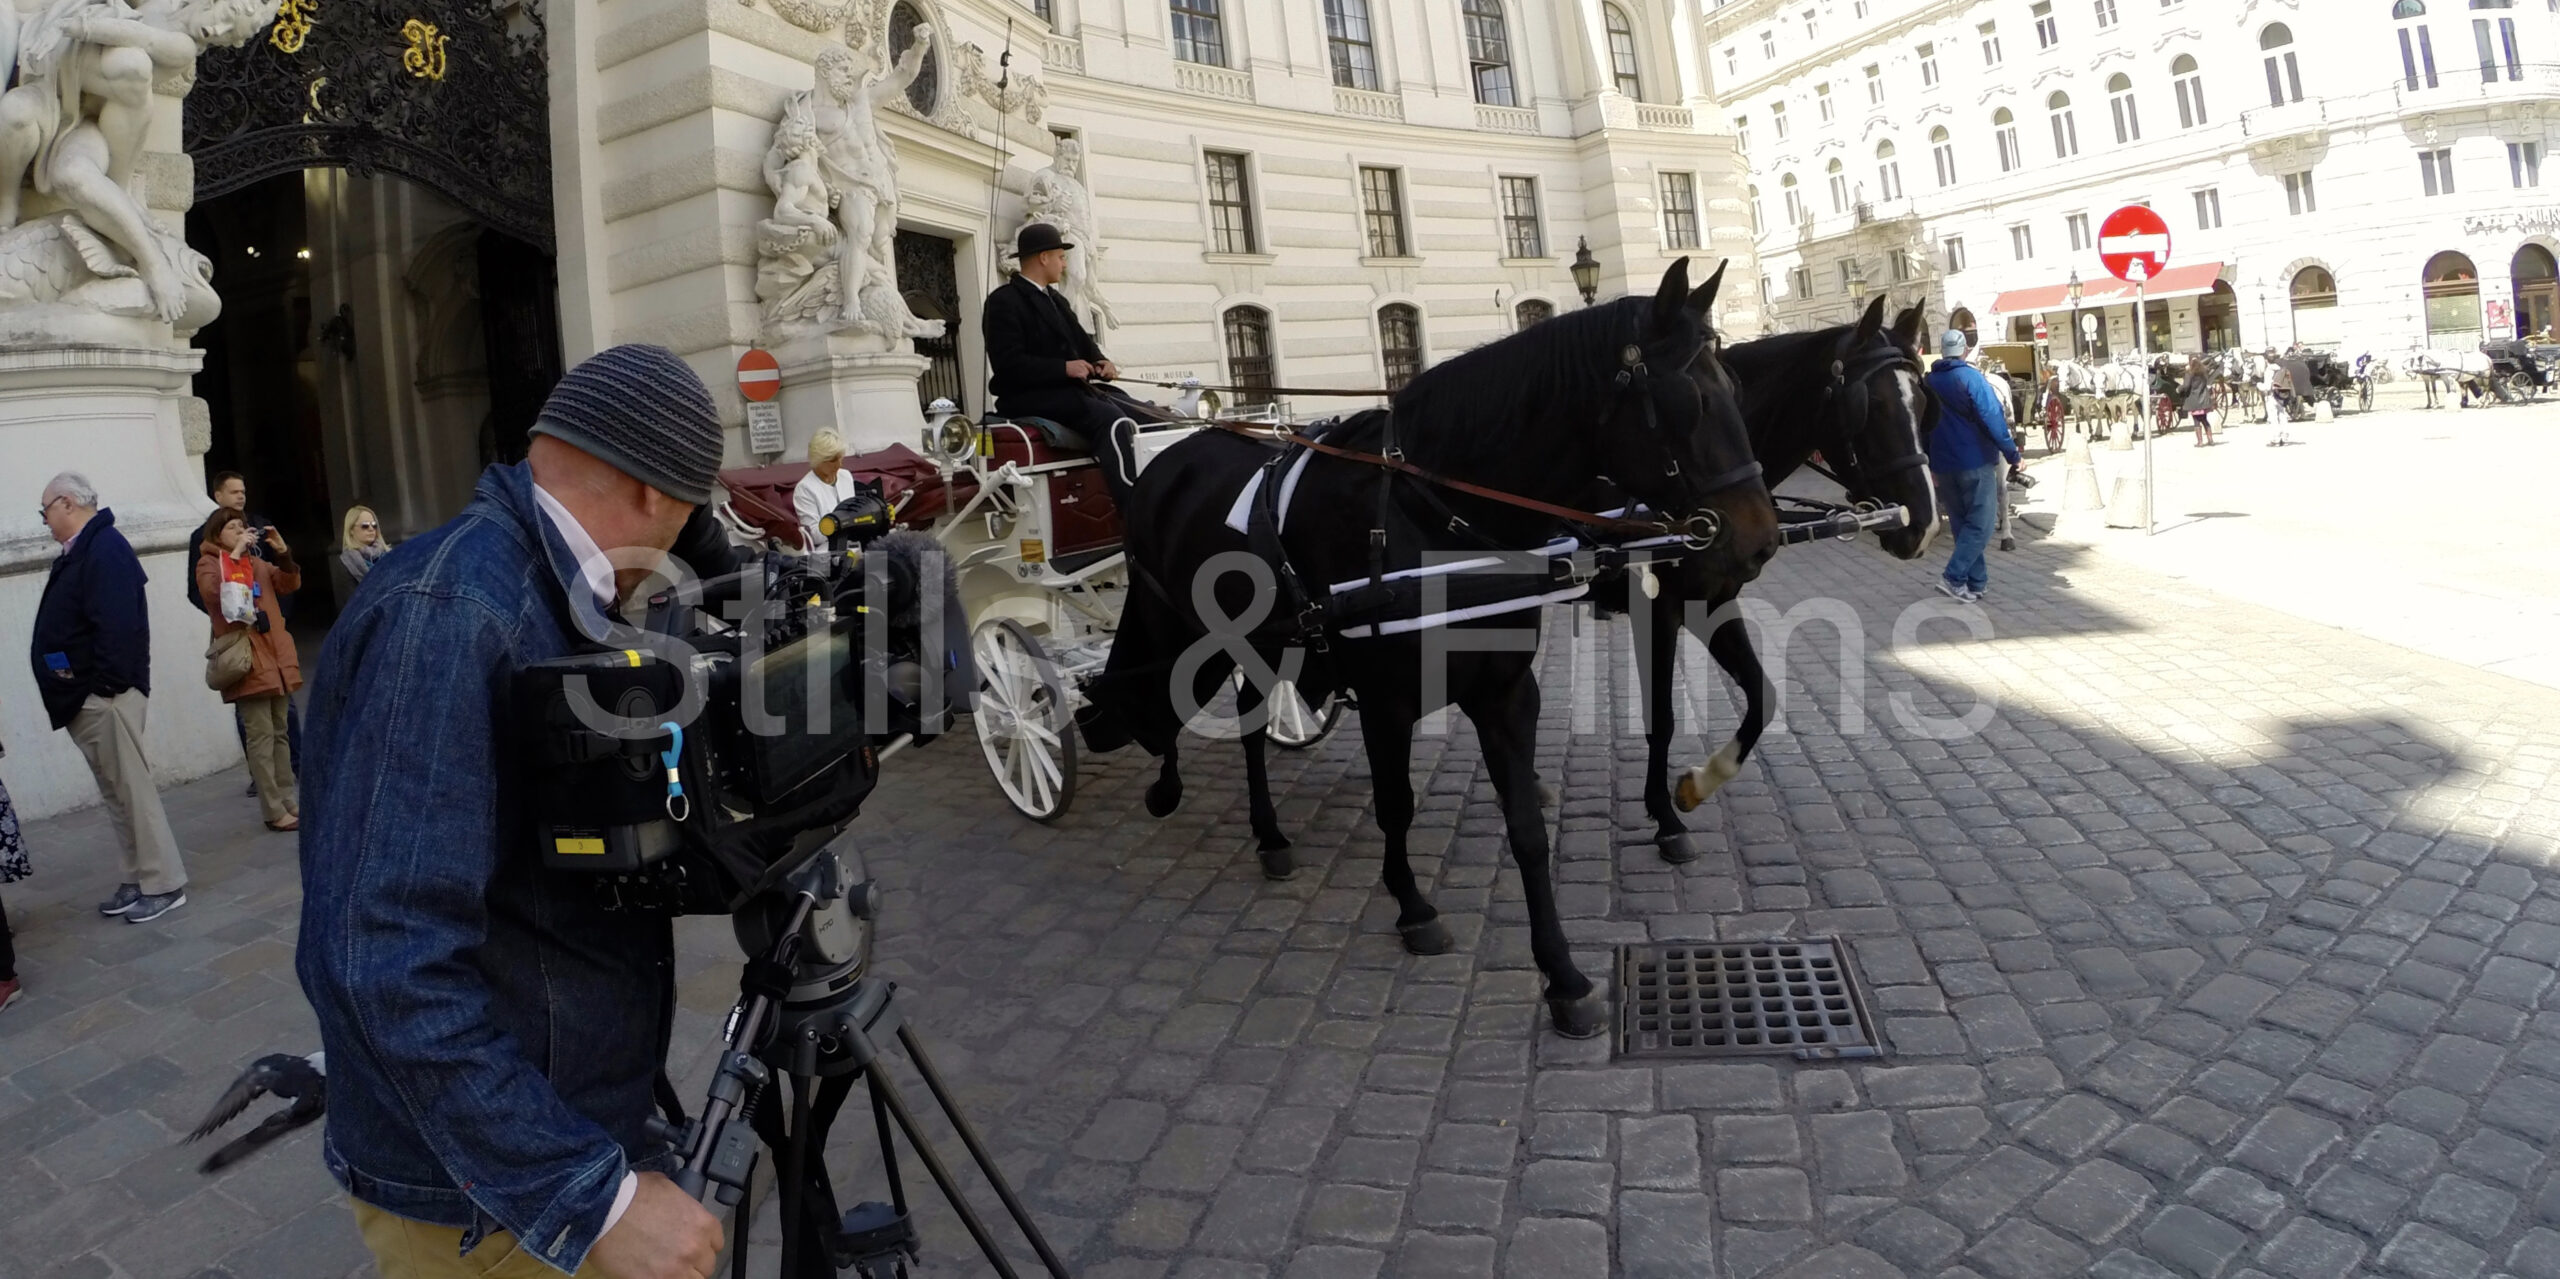 Our local video crew in Vienna, Austria films a travel feature for a US client